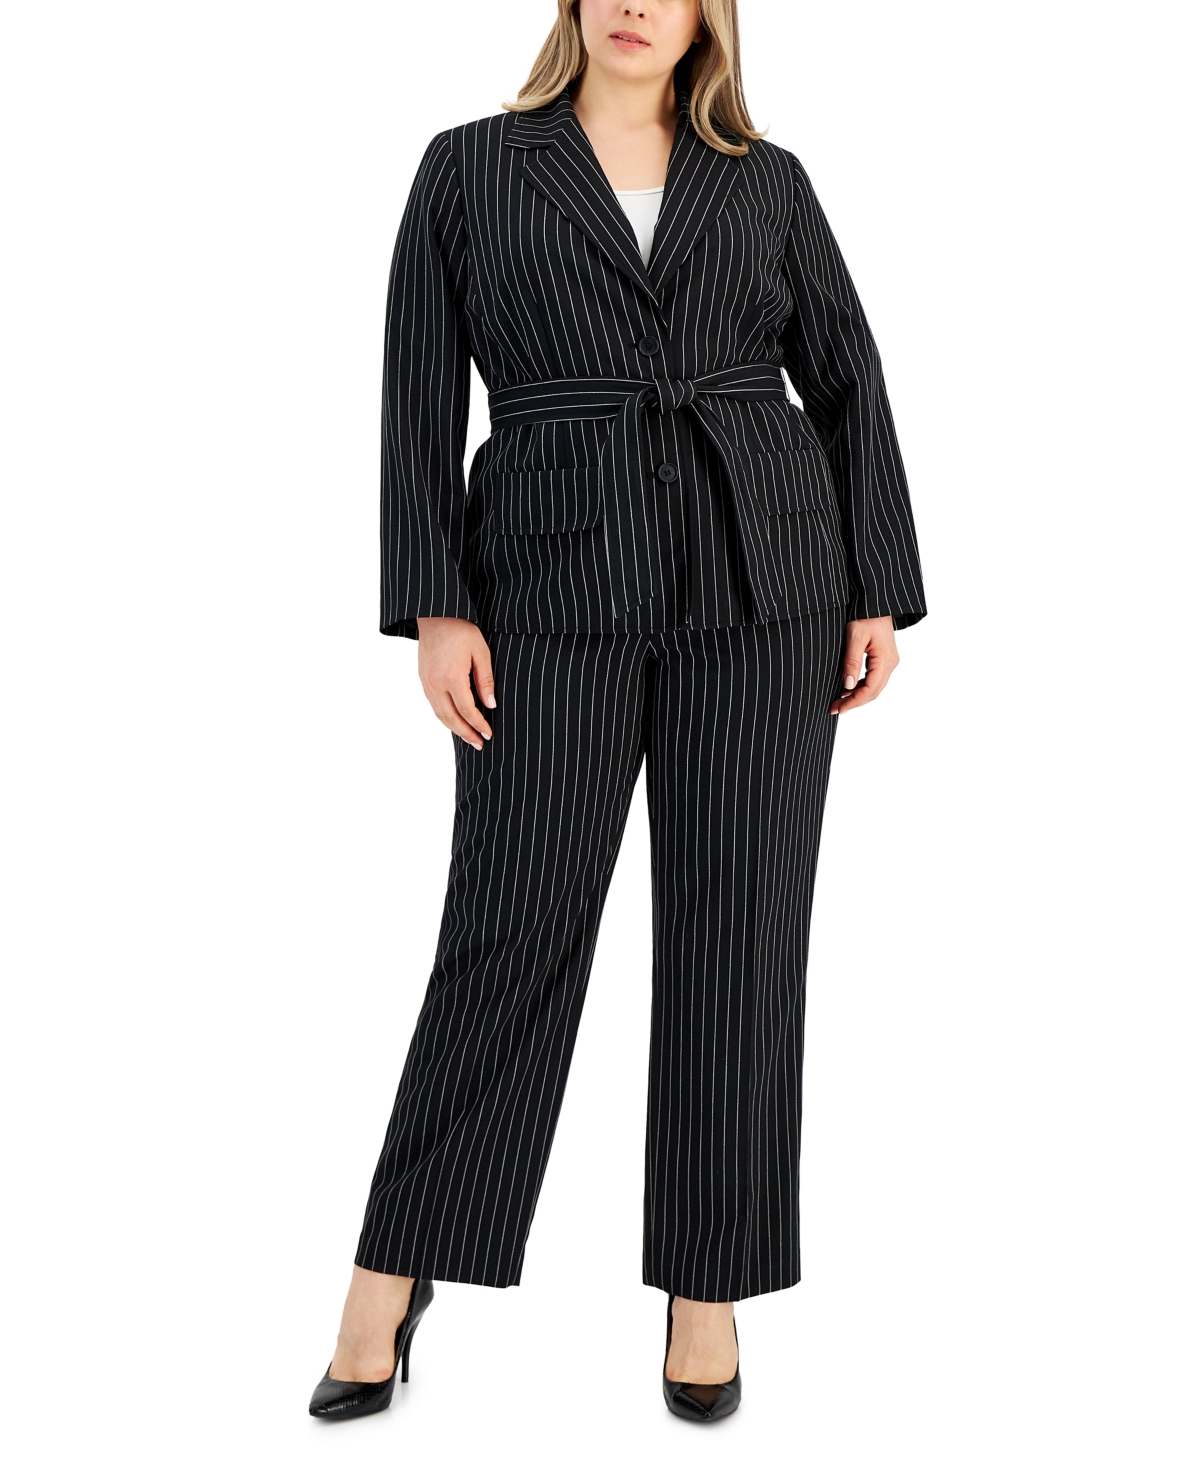 Plus Size Striped Belted Pantsuit - Black/White